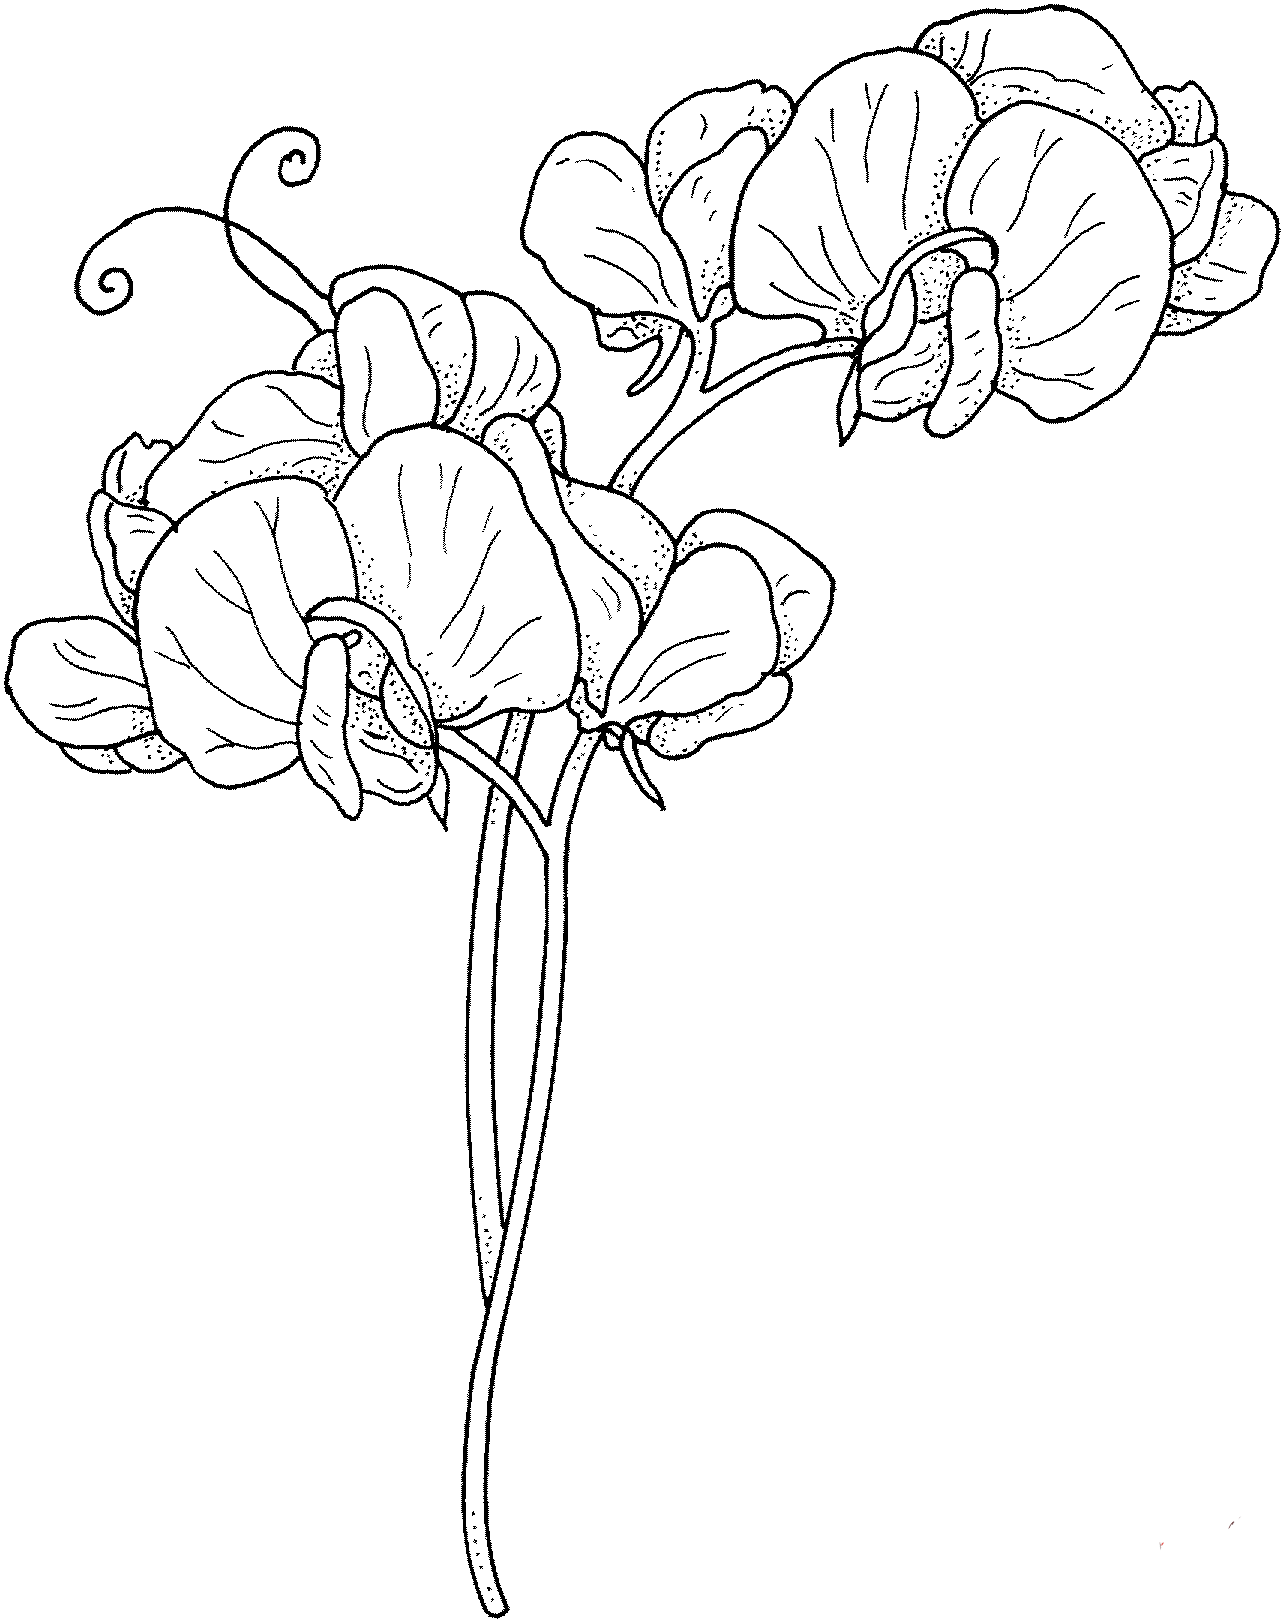 Orchid coloring picture for kids to practice coloring